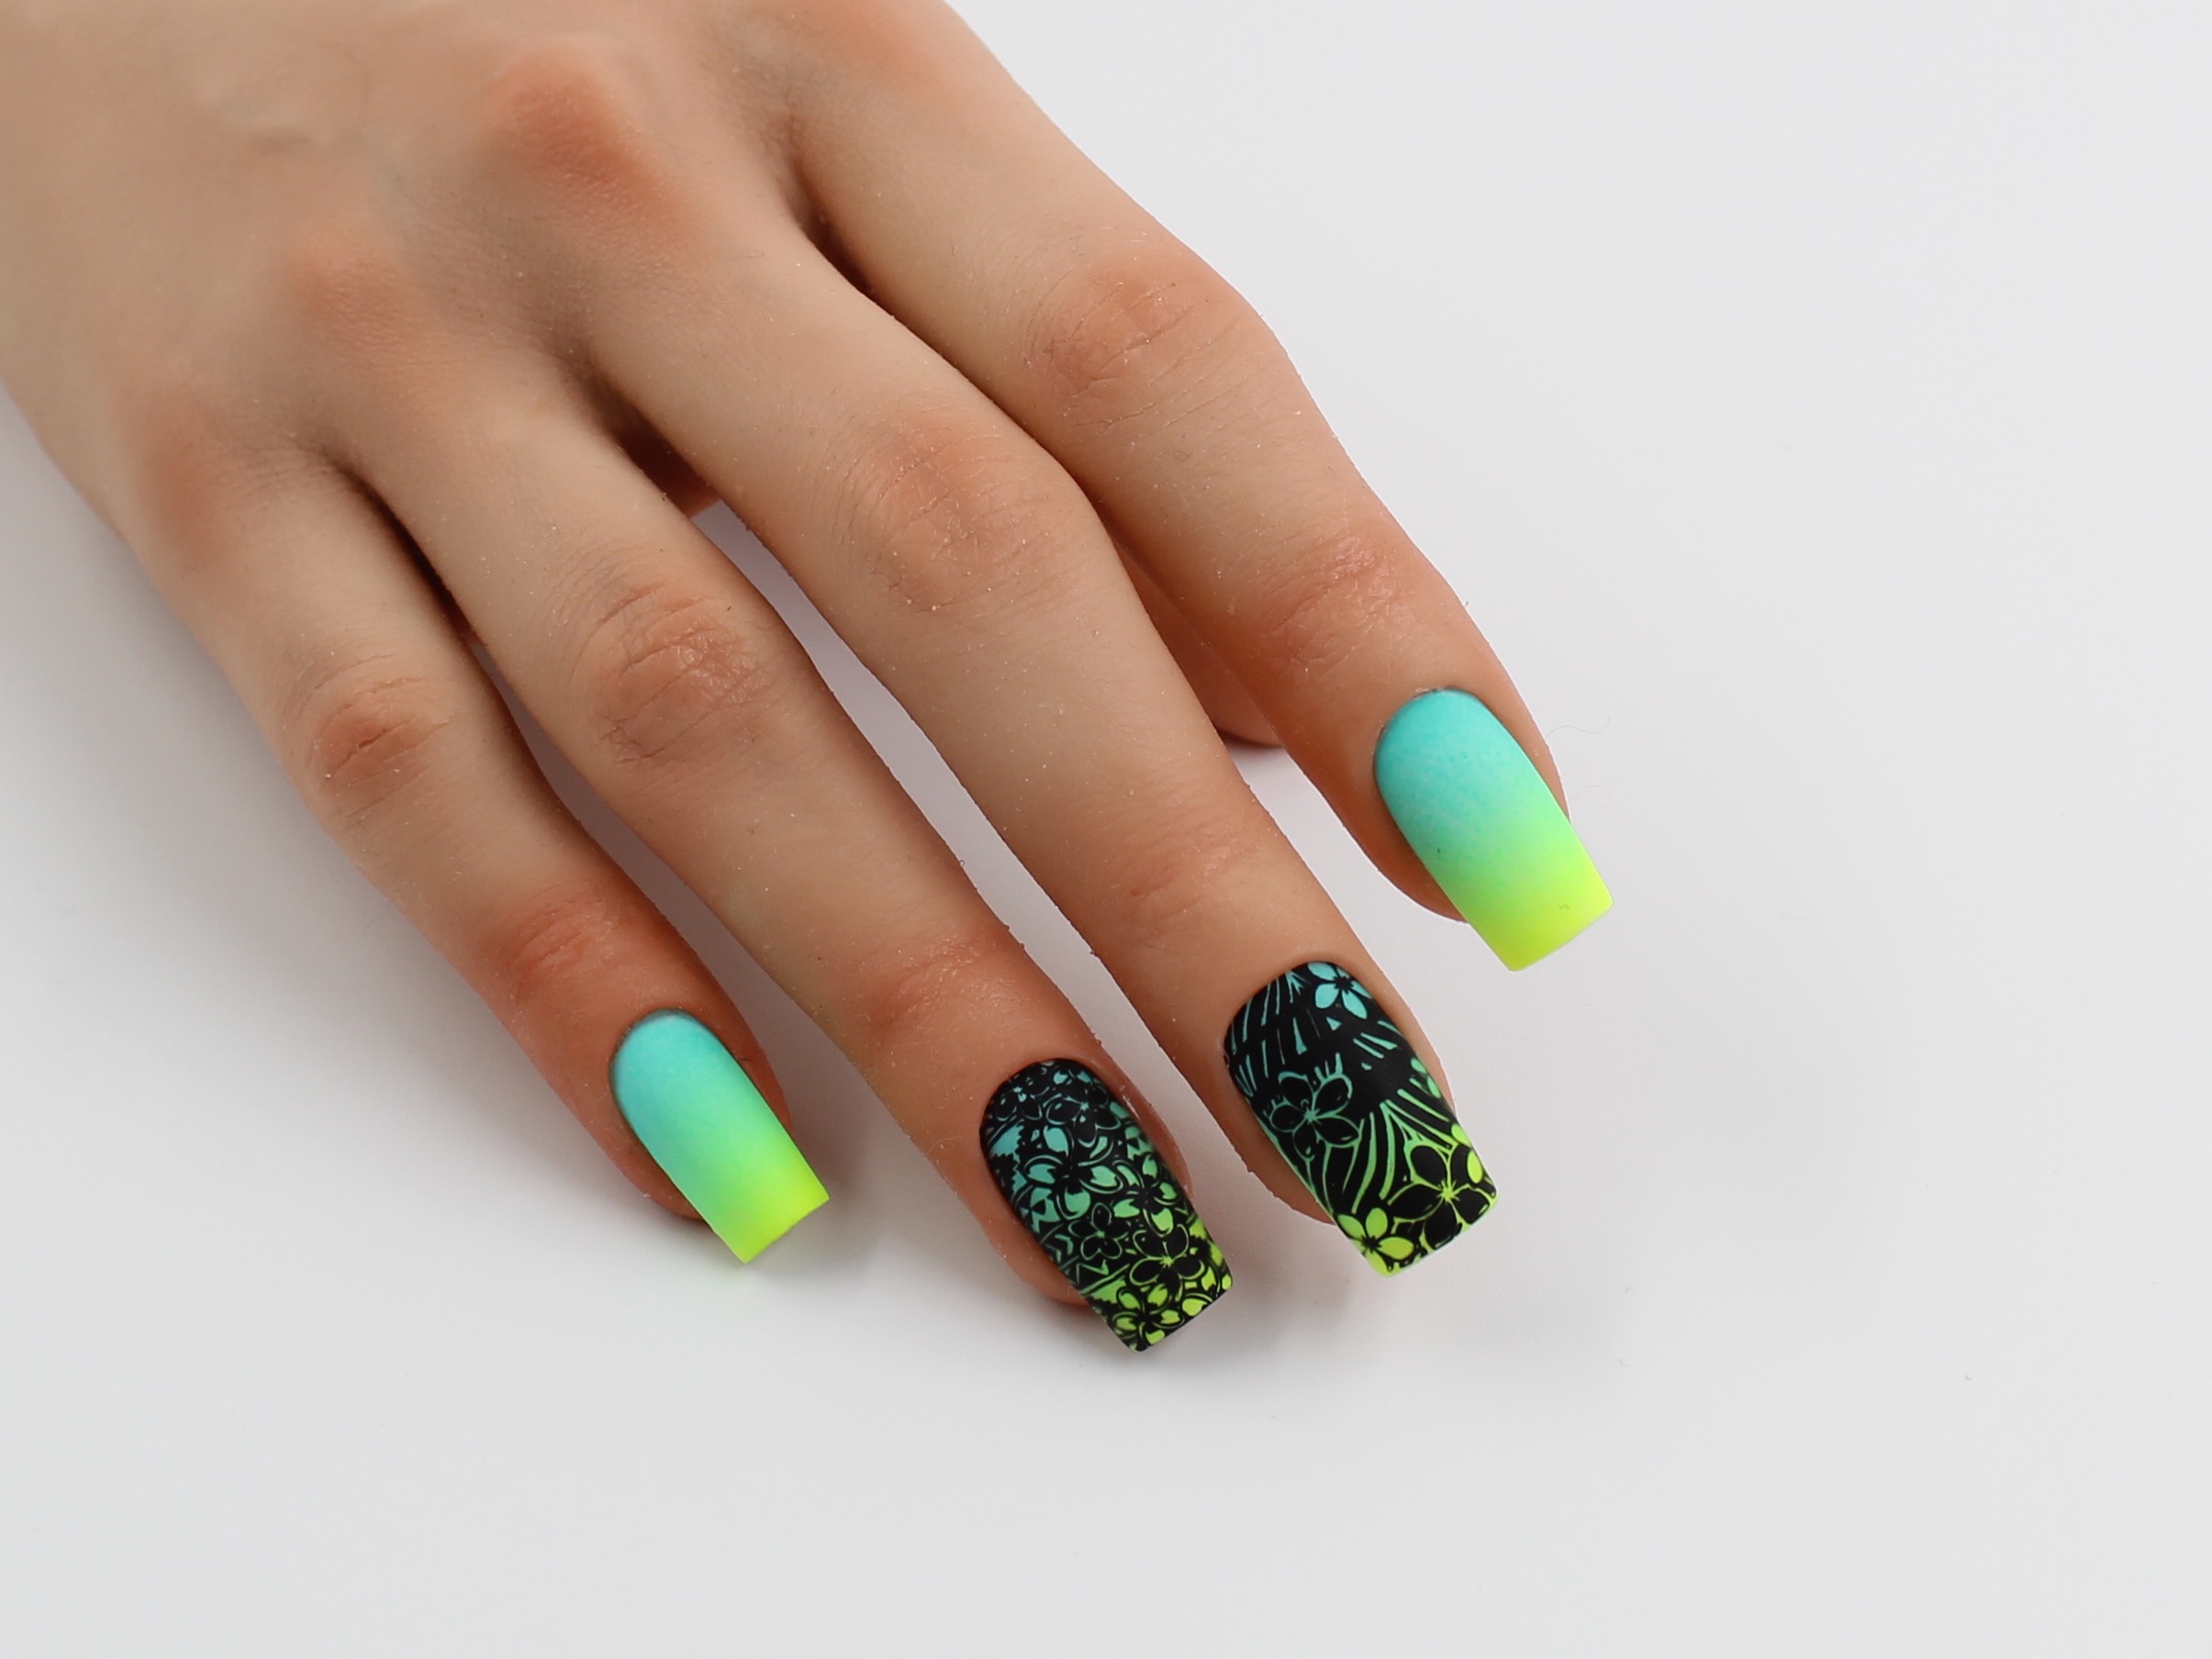 8. Orange and Green Tropical Nail Design for Short Nails - wide 3